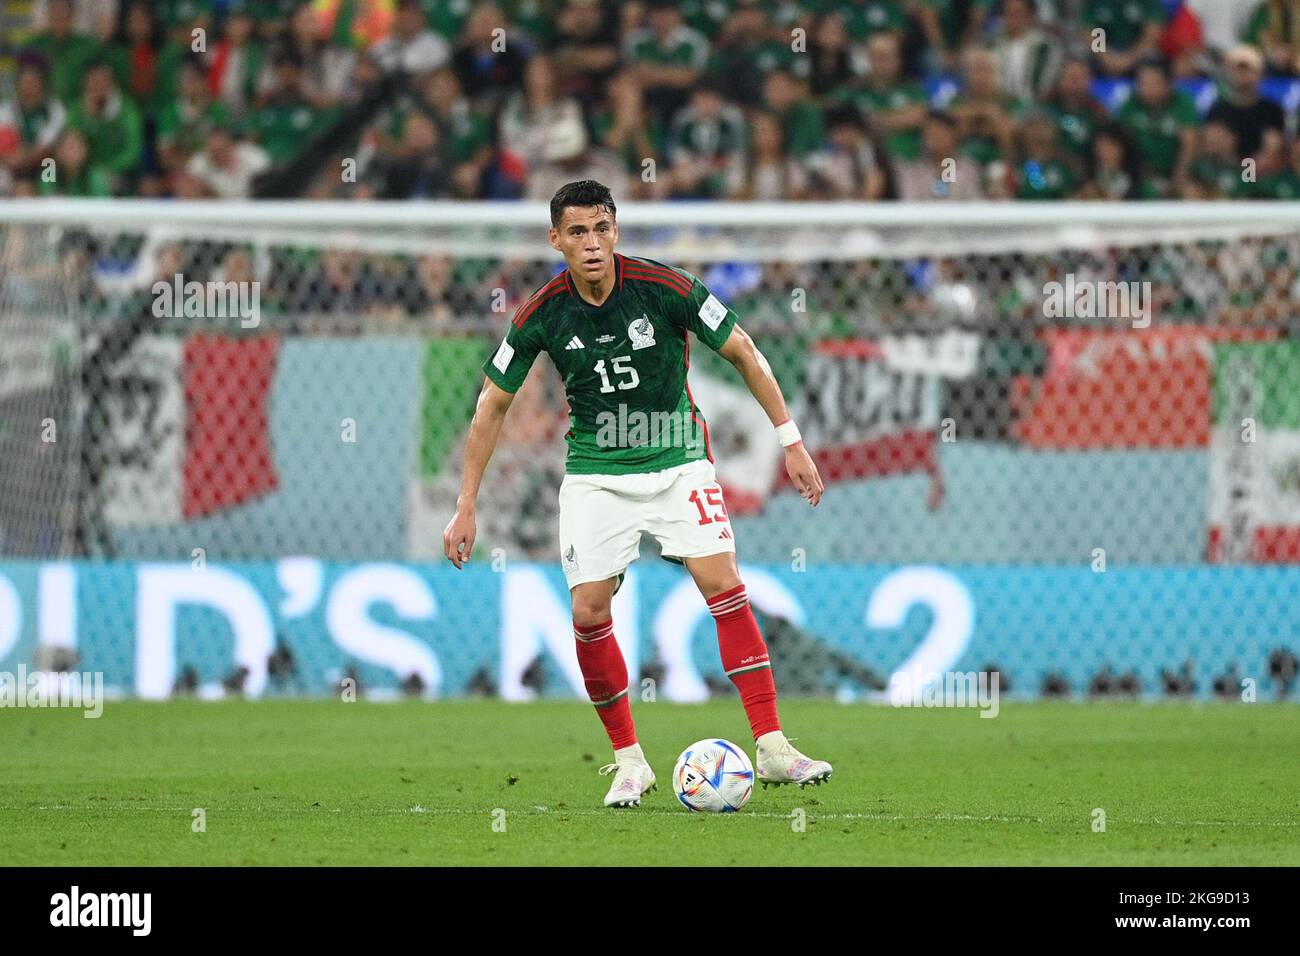 Doha, Catar. 22nd Nov, 2022. Héctor Moreno of Mexico during the match between Mexico and Poland, valid for the group stage of the World Cup, held at 974 Stadium in Doha, Qatar. Credit: Richard Callis/FotoArena/Alamy Live News Stock Photo